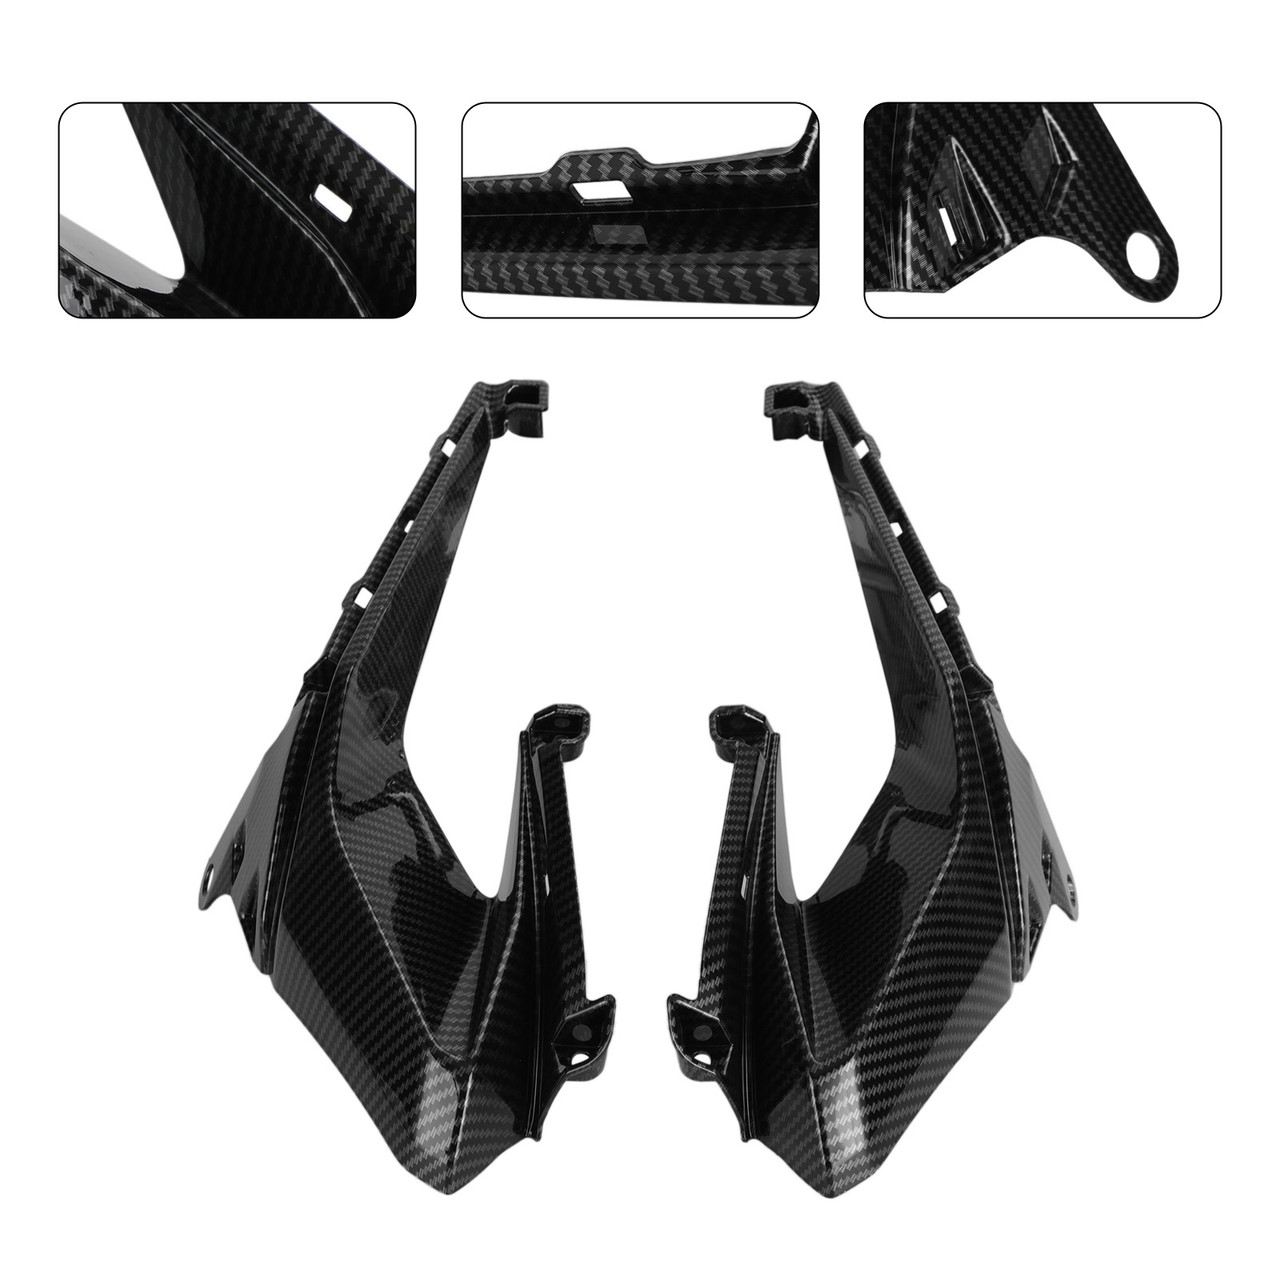 Air Intake Vent Cover side Panels Fit for Honda CBR500R 2019-2021 Carbon